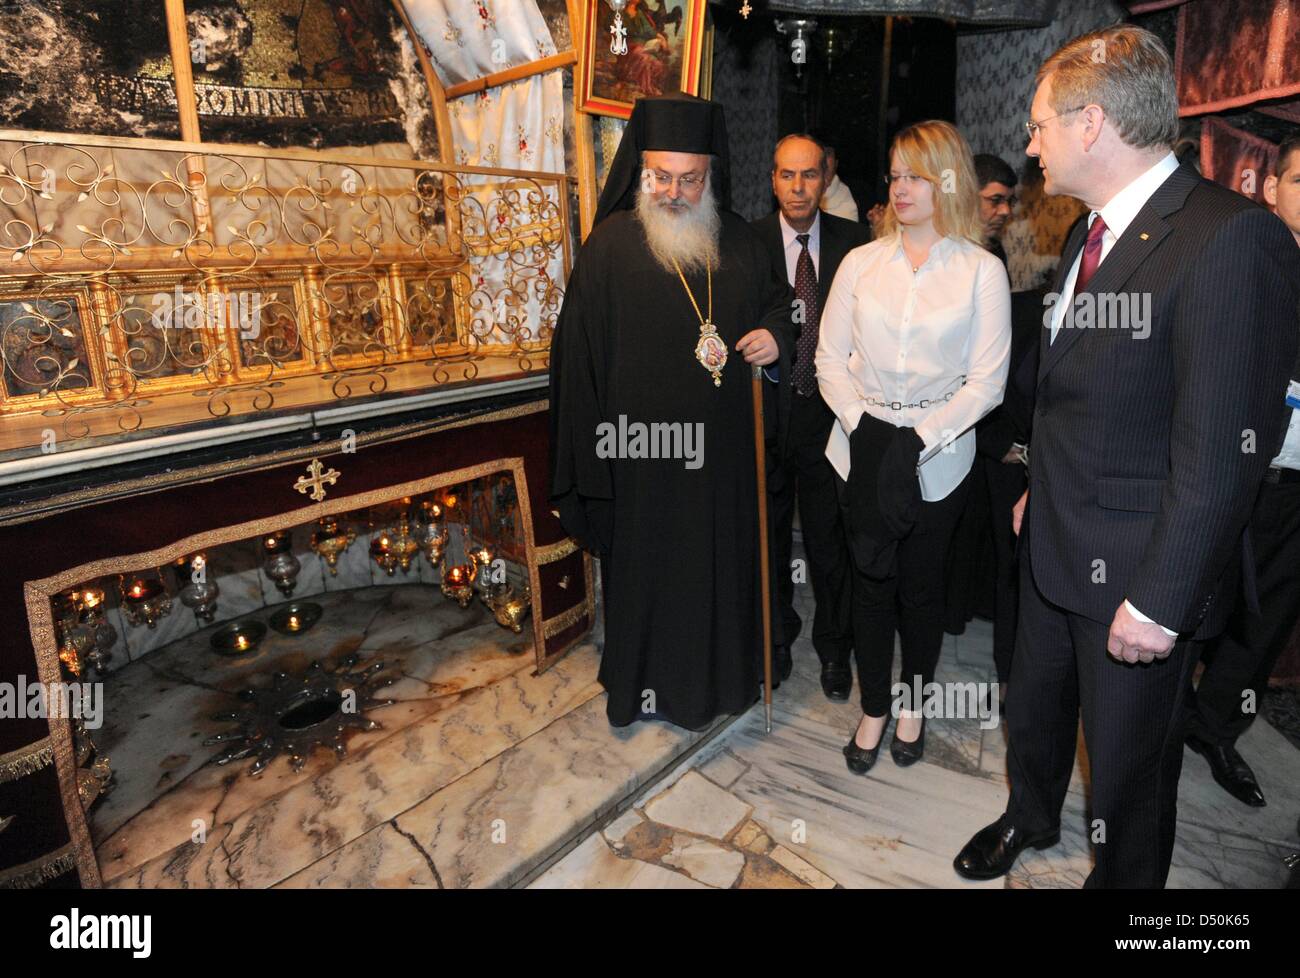 German President Christian Wulff (R) and his daughter Annalena walk through the Church of the Nativity together with Greek-Orthodox bishop Theoflakes (L) in Bethlehem, Palestinian Territories, 30 November 2010. The four-day state visit of German President Wulff will end today with his visit to the Palestinian Territories. Photo: RAINER JENSEN Stock Photo